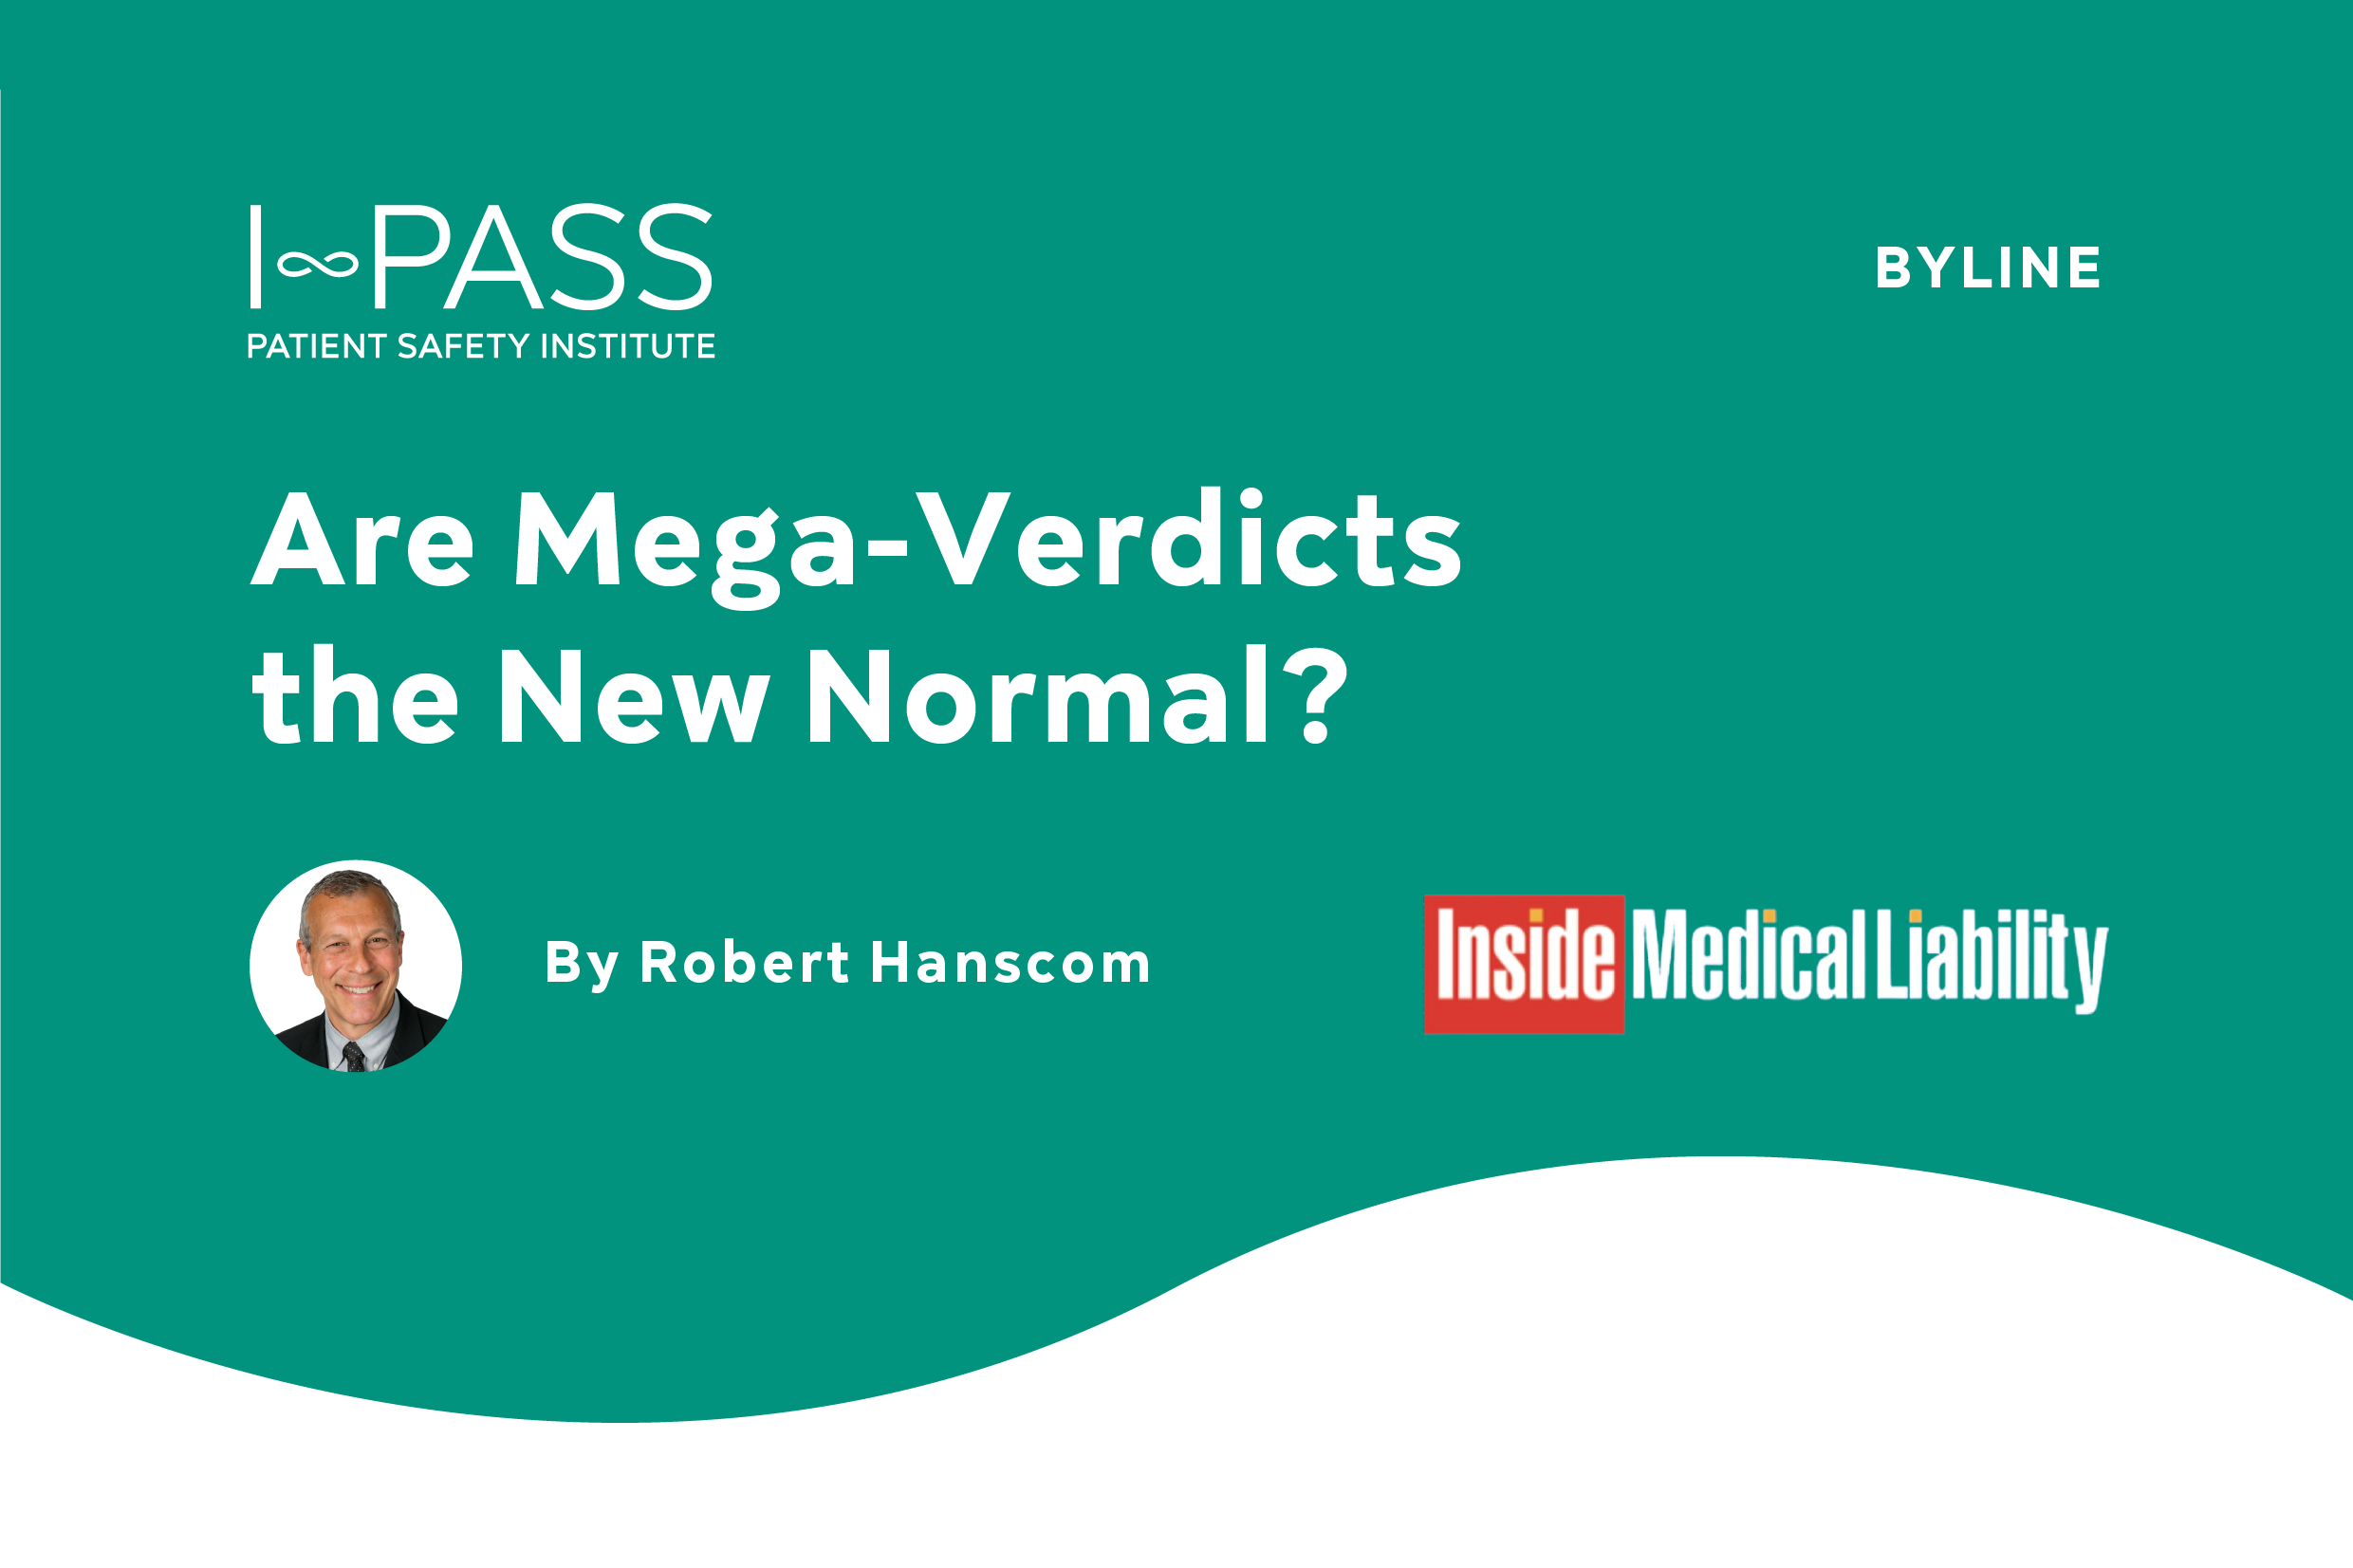 Inside Medical Liability Magazine: Are Mega Verdicts the New Normal?